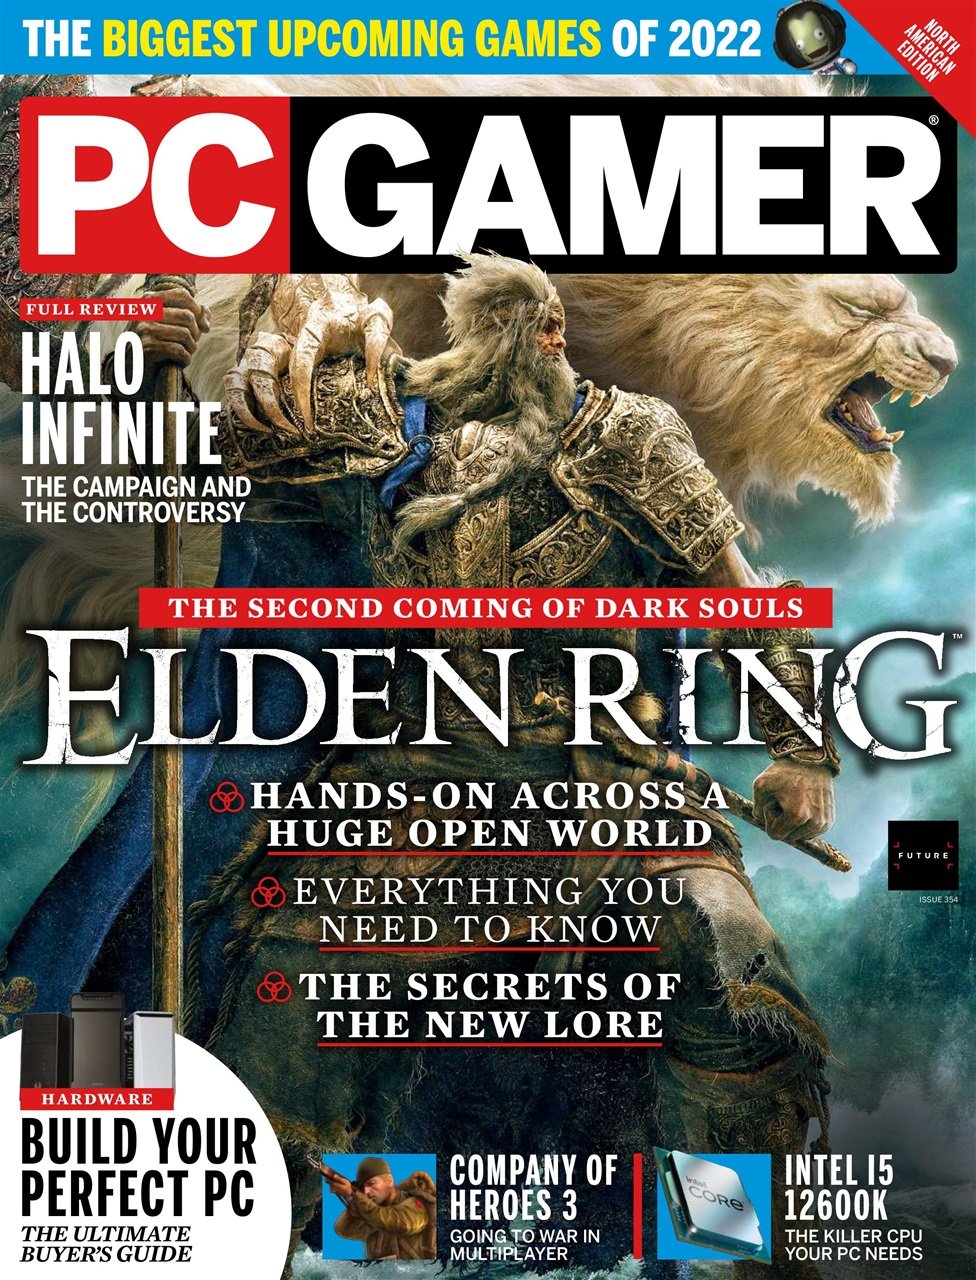 PC Gamer Issue 354 (March 2022)